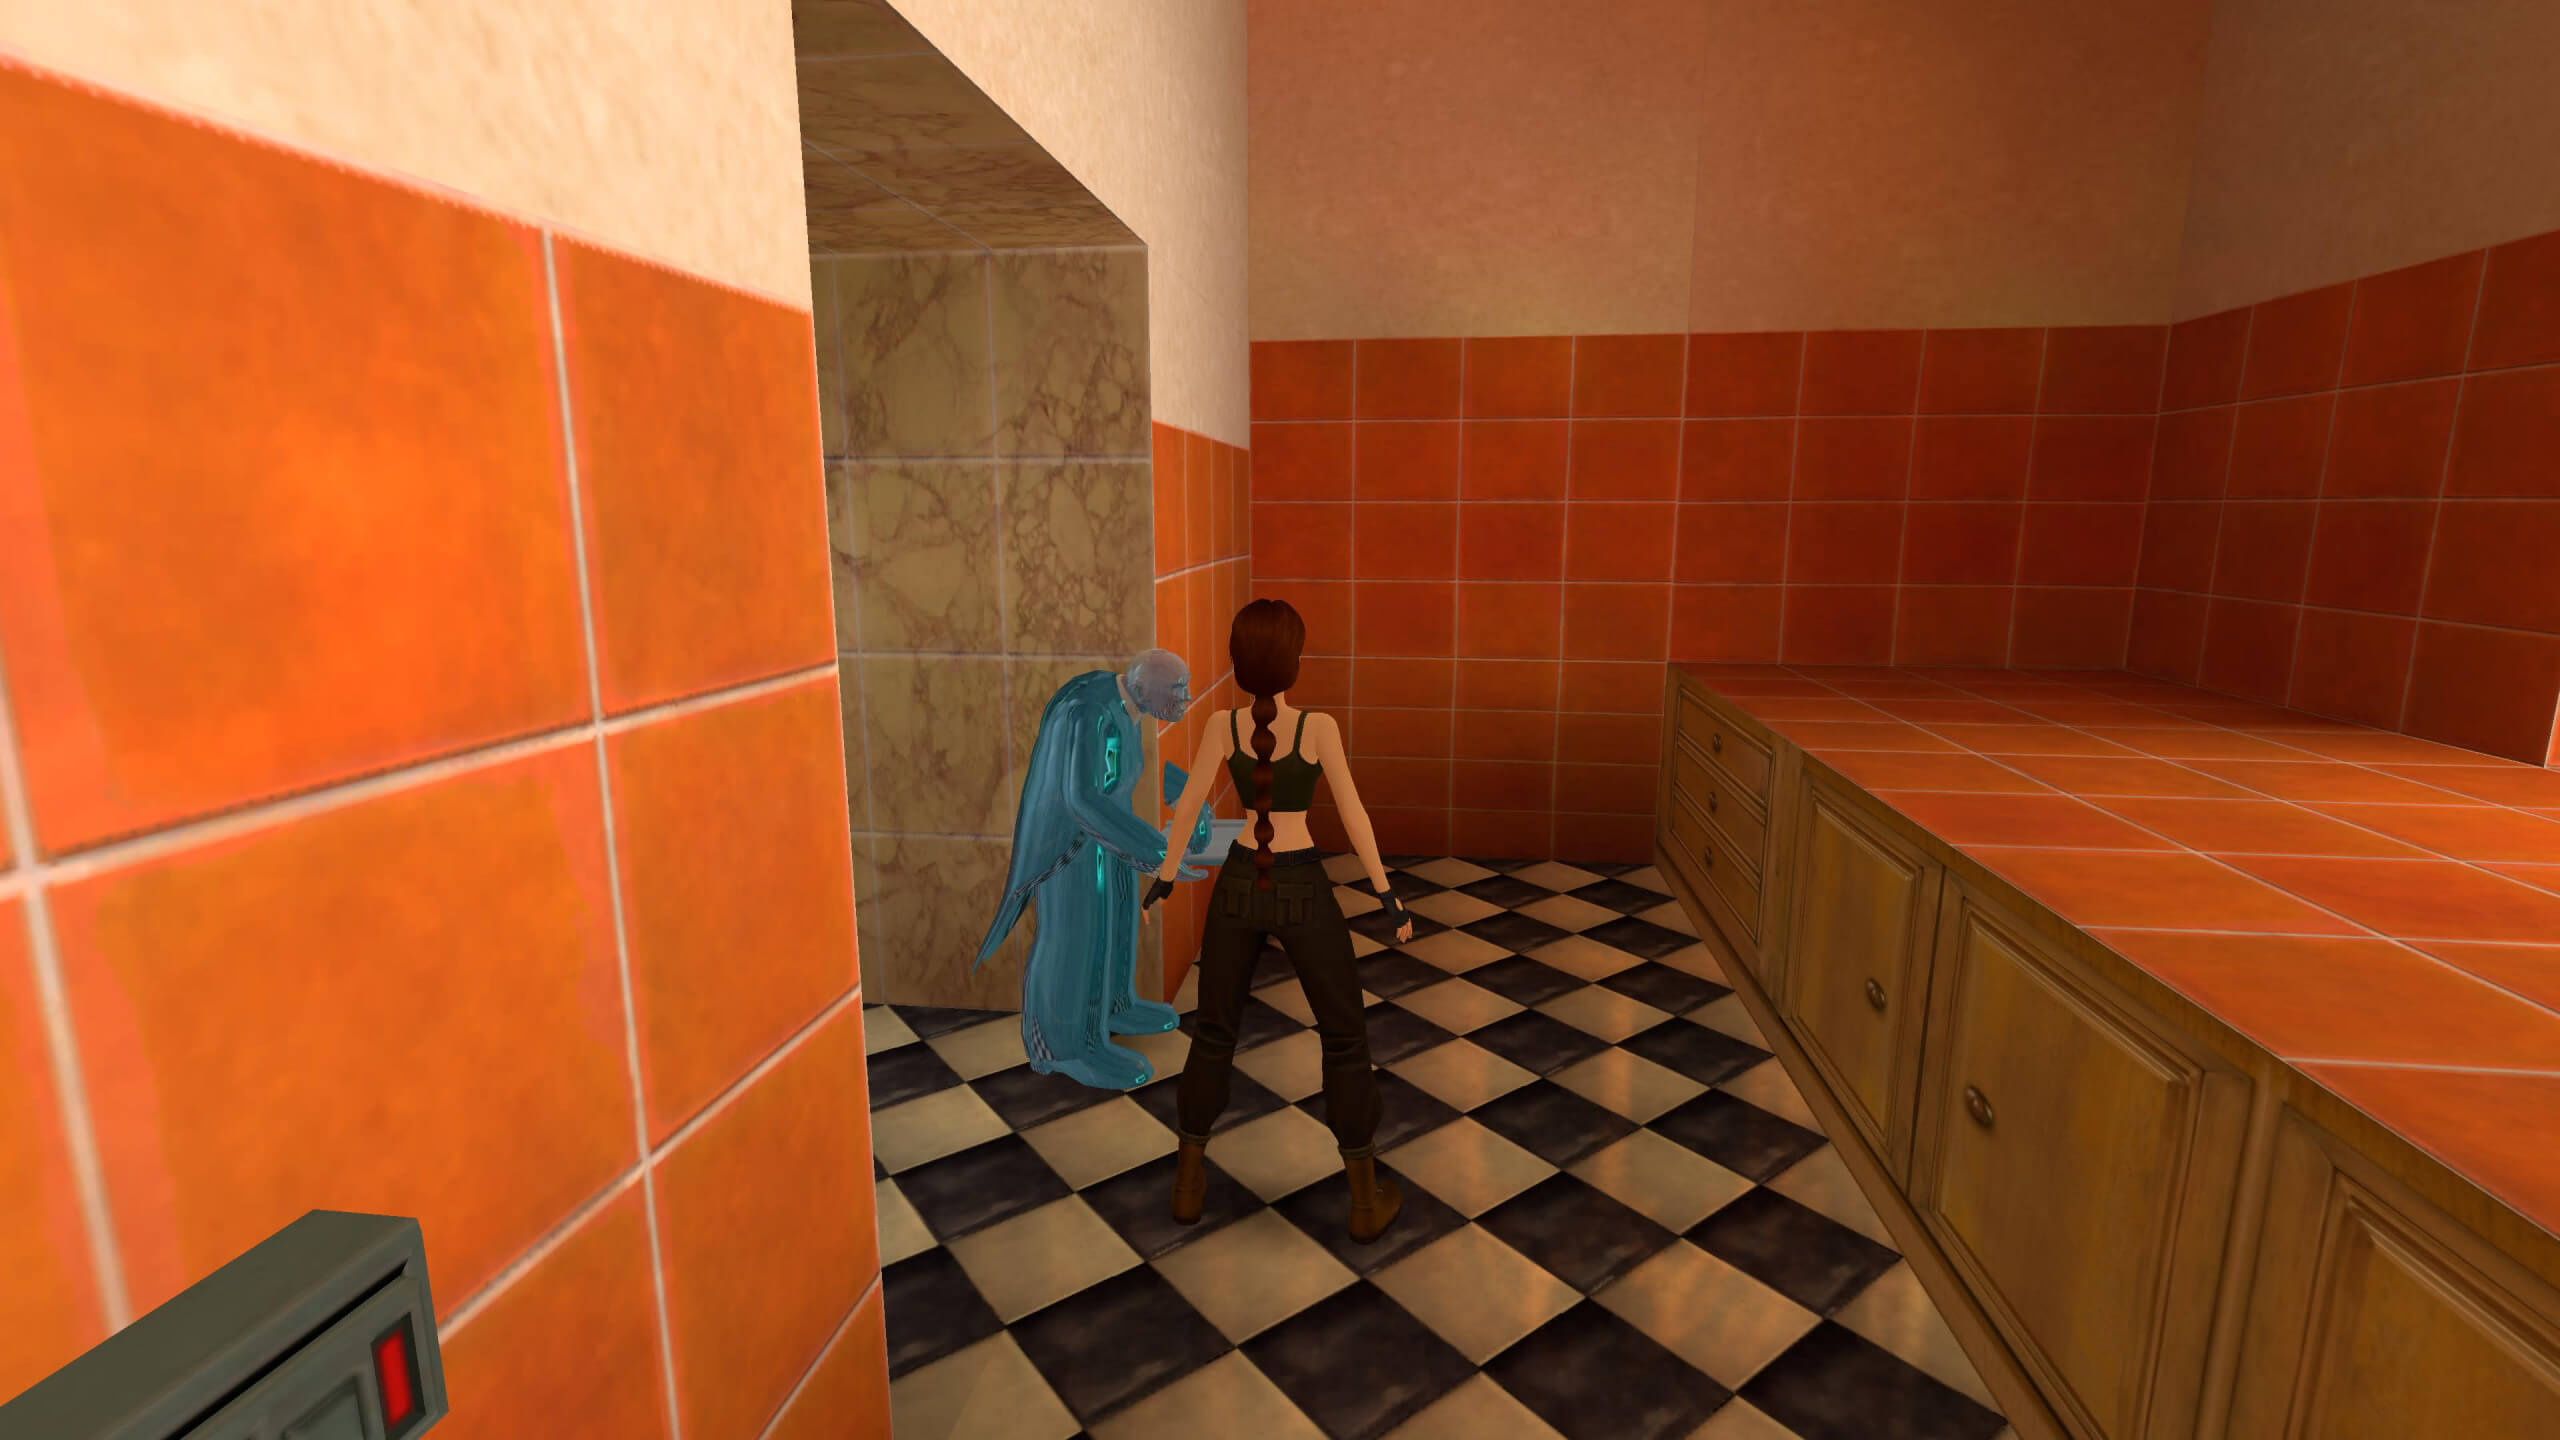 A screenshot from Tomb Raider 2 where Lara is stood in her kitchen. In front of her is her butler Winston who is frozen after being locked in the freezer.